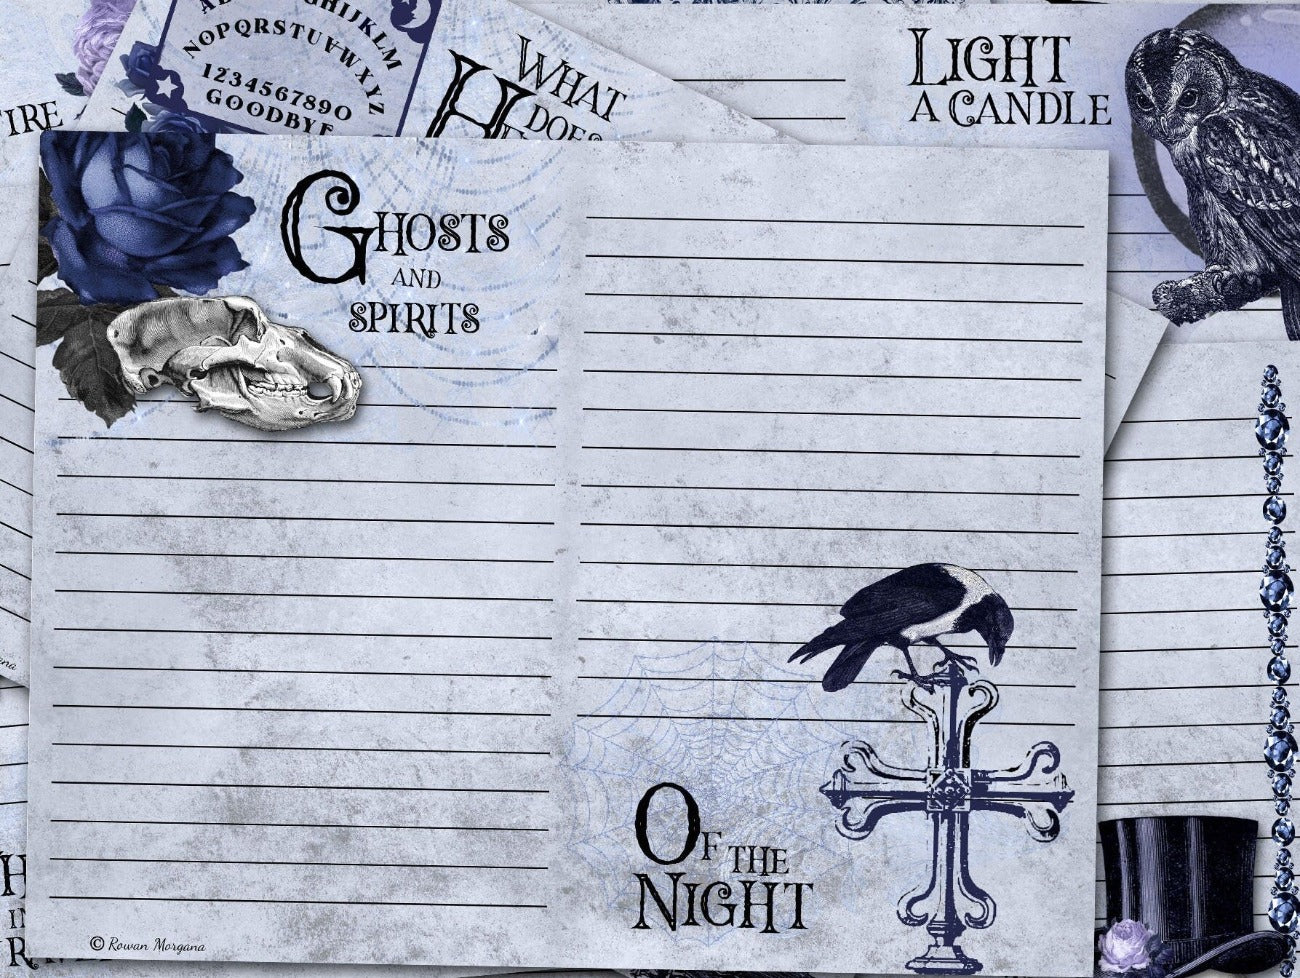 Ghosts and Spirits, Of the Night- SAMHAIN JUNK JOURNAL Kit Printable Pages - Morgana Magick Spell